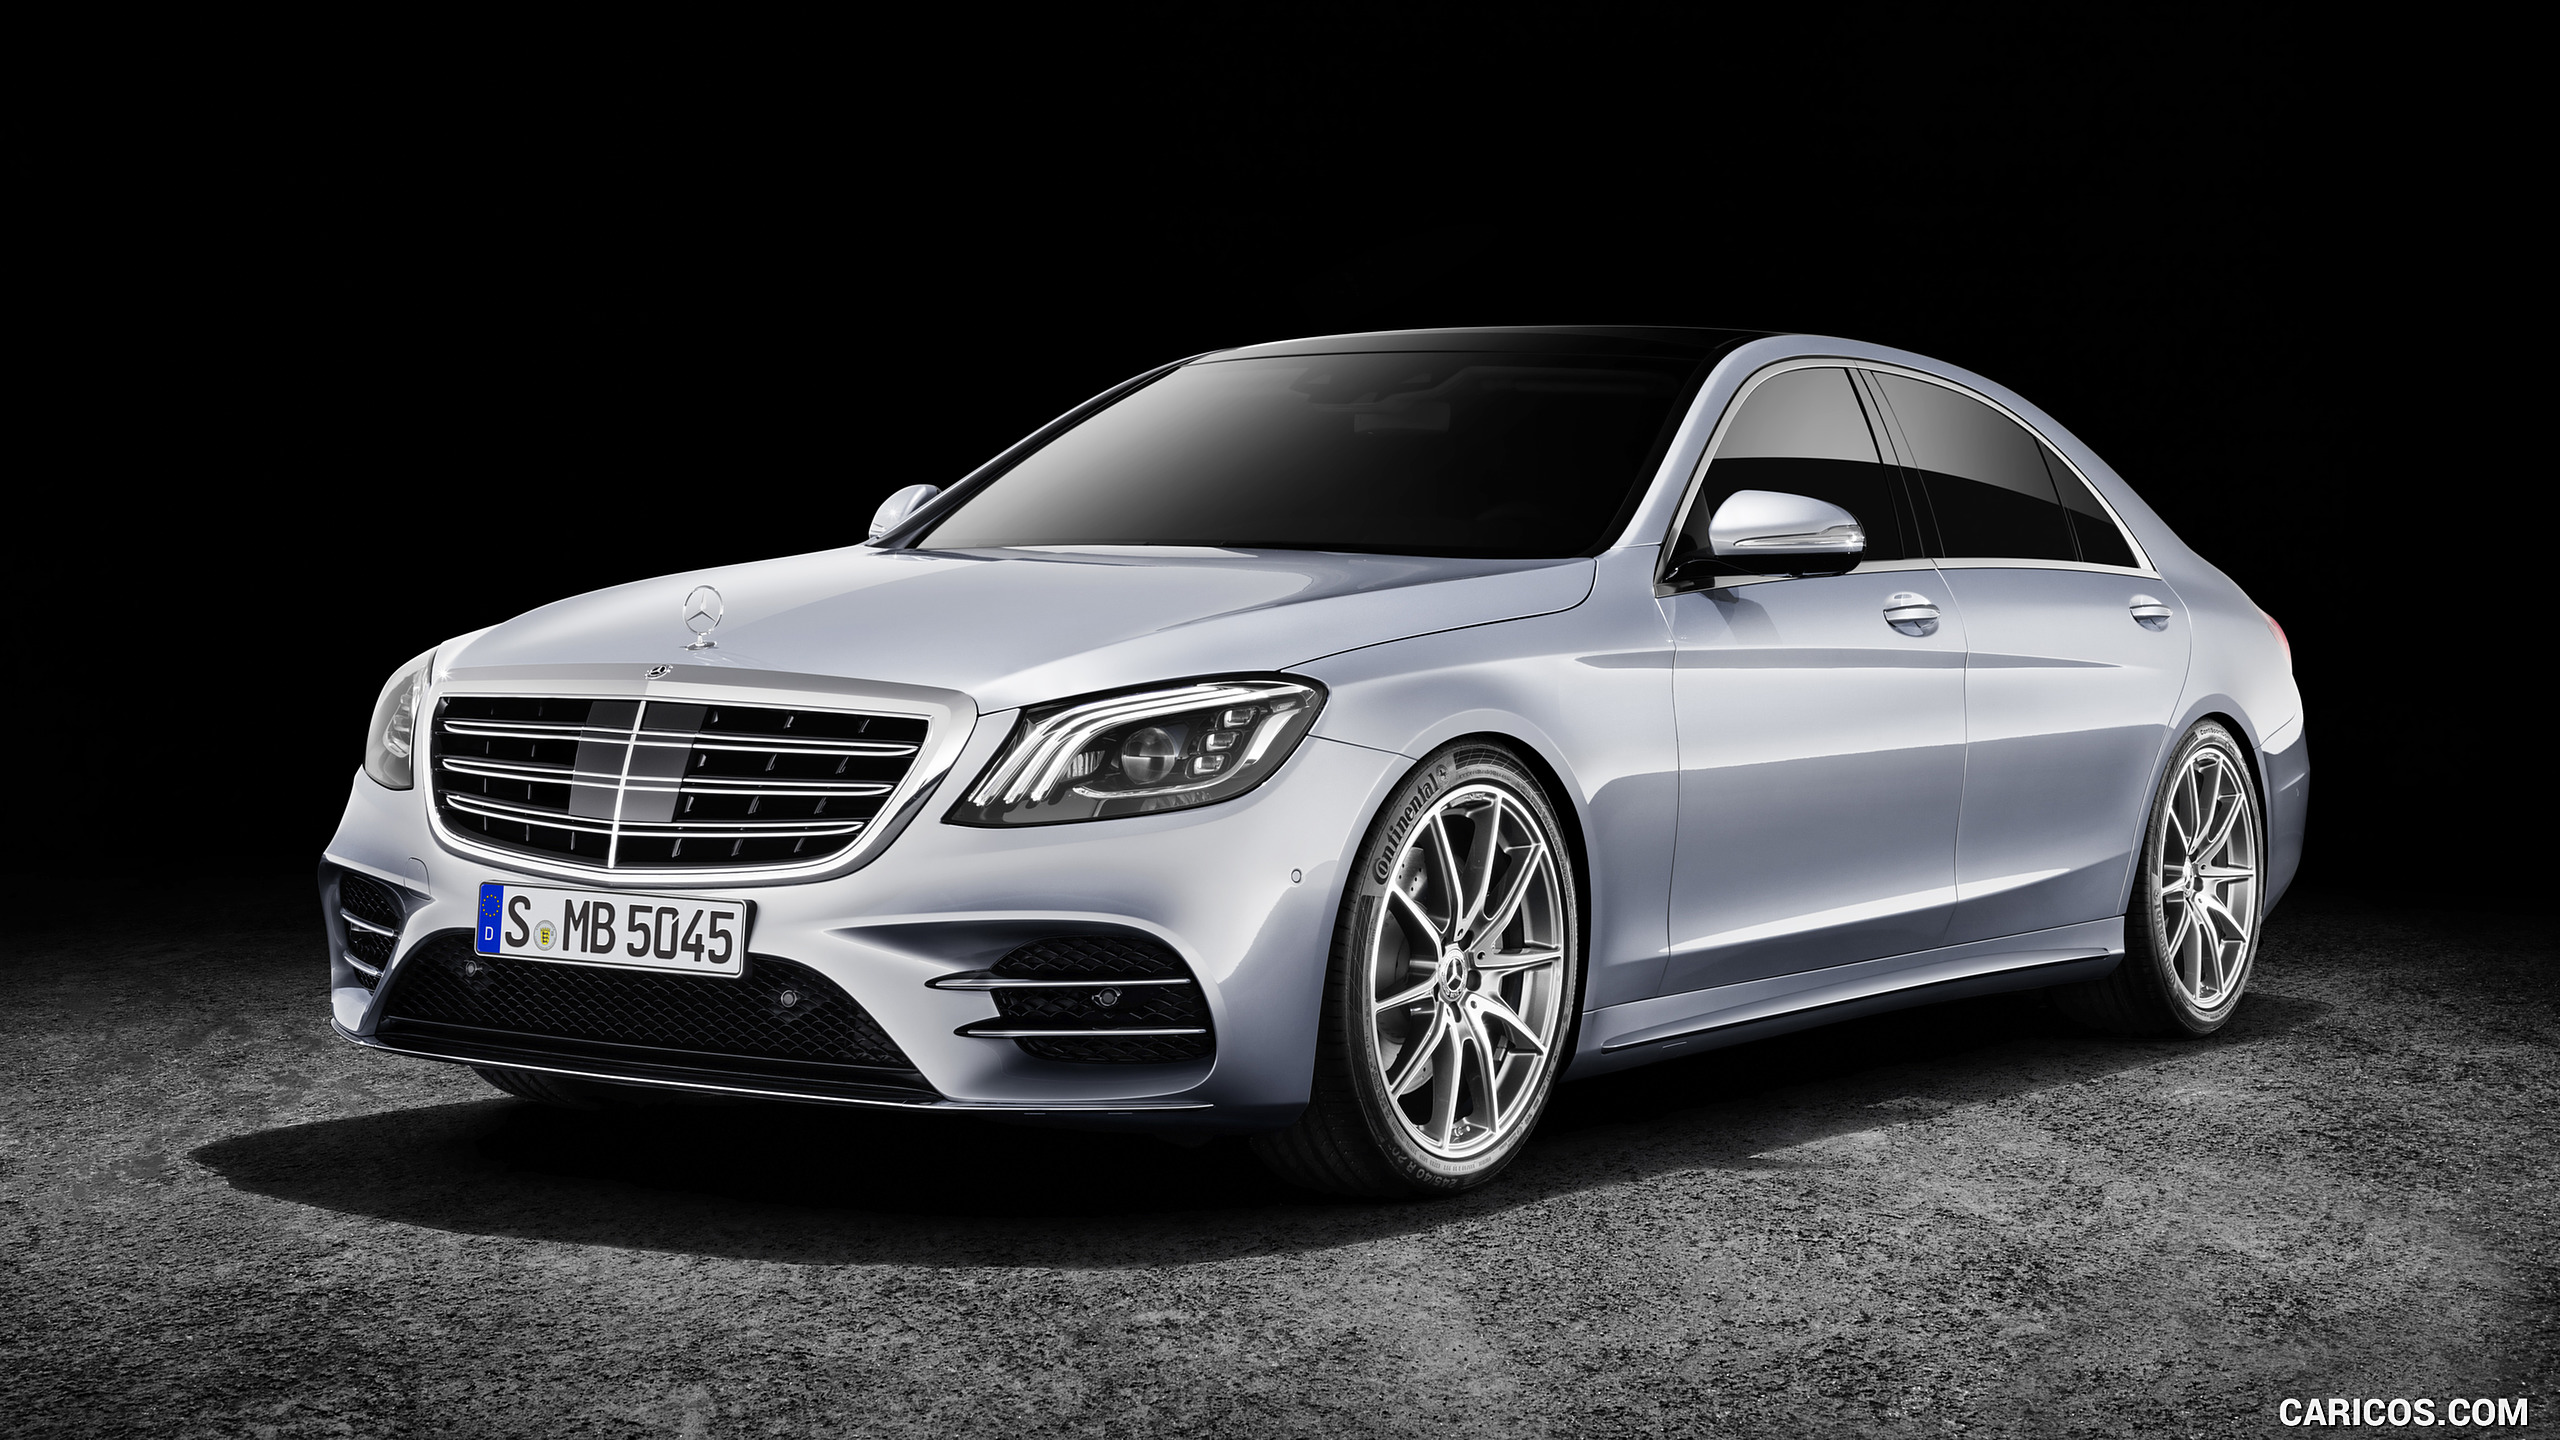 2018 Mercedes-Benz S-Class AMG Line LWB (Color: Diamond Silver), #7 of 156